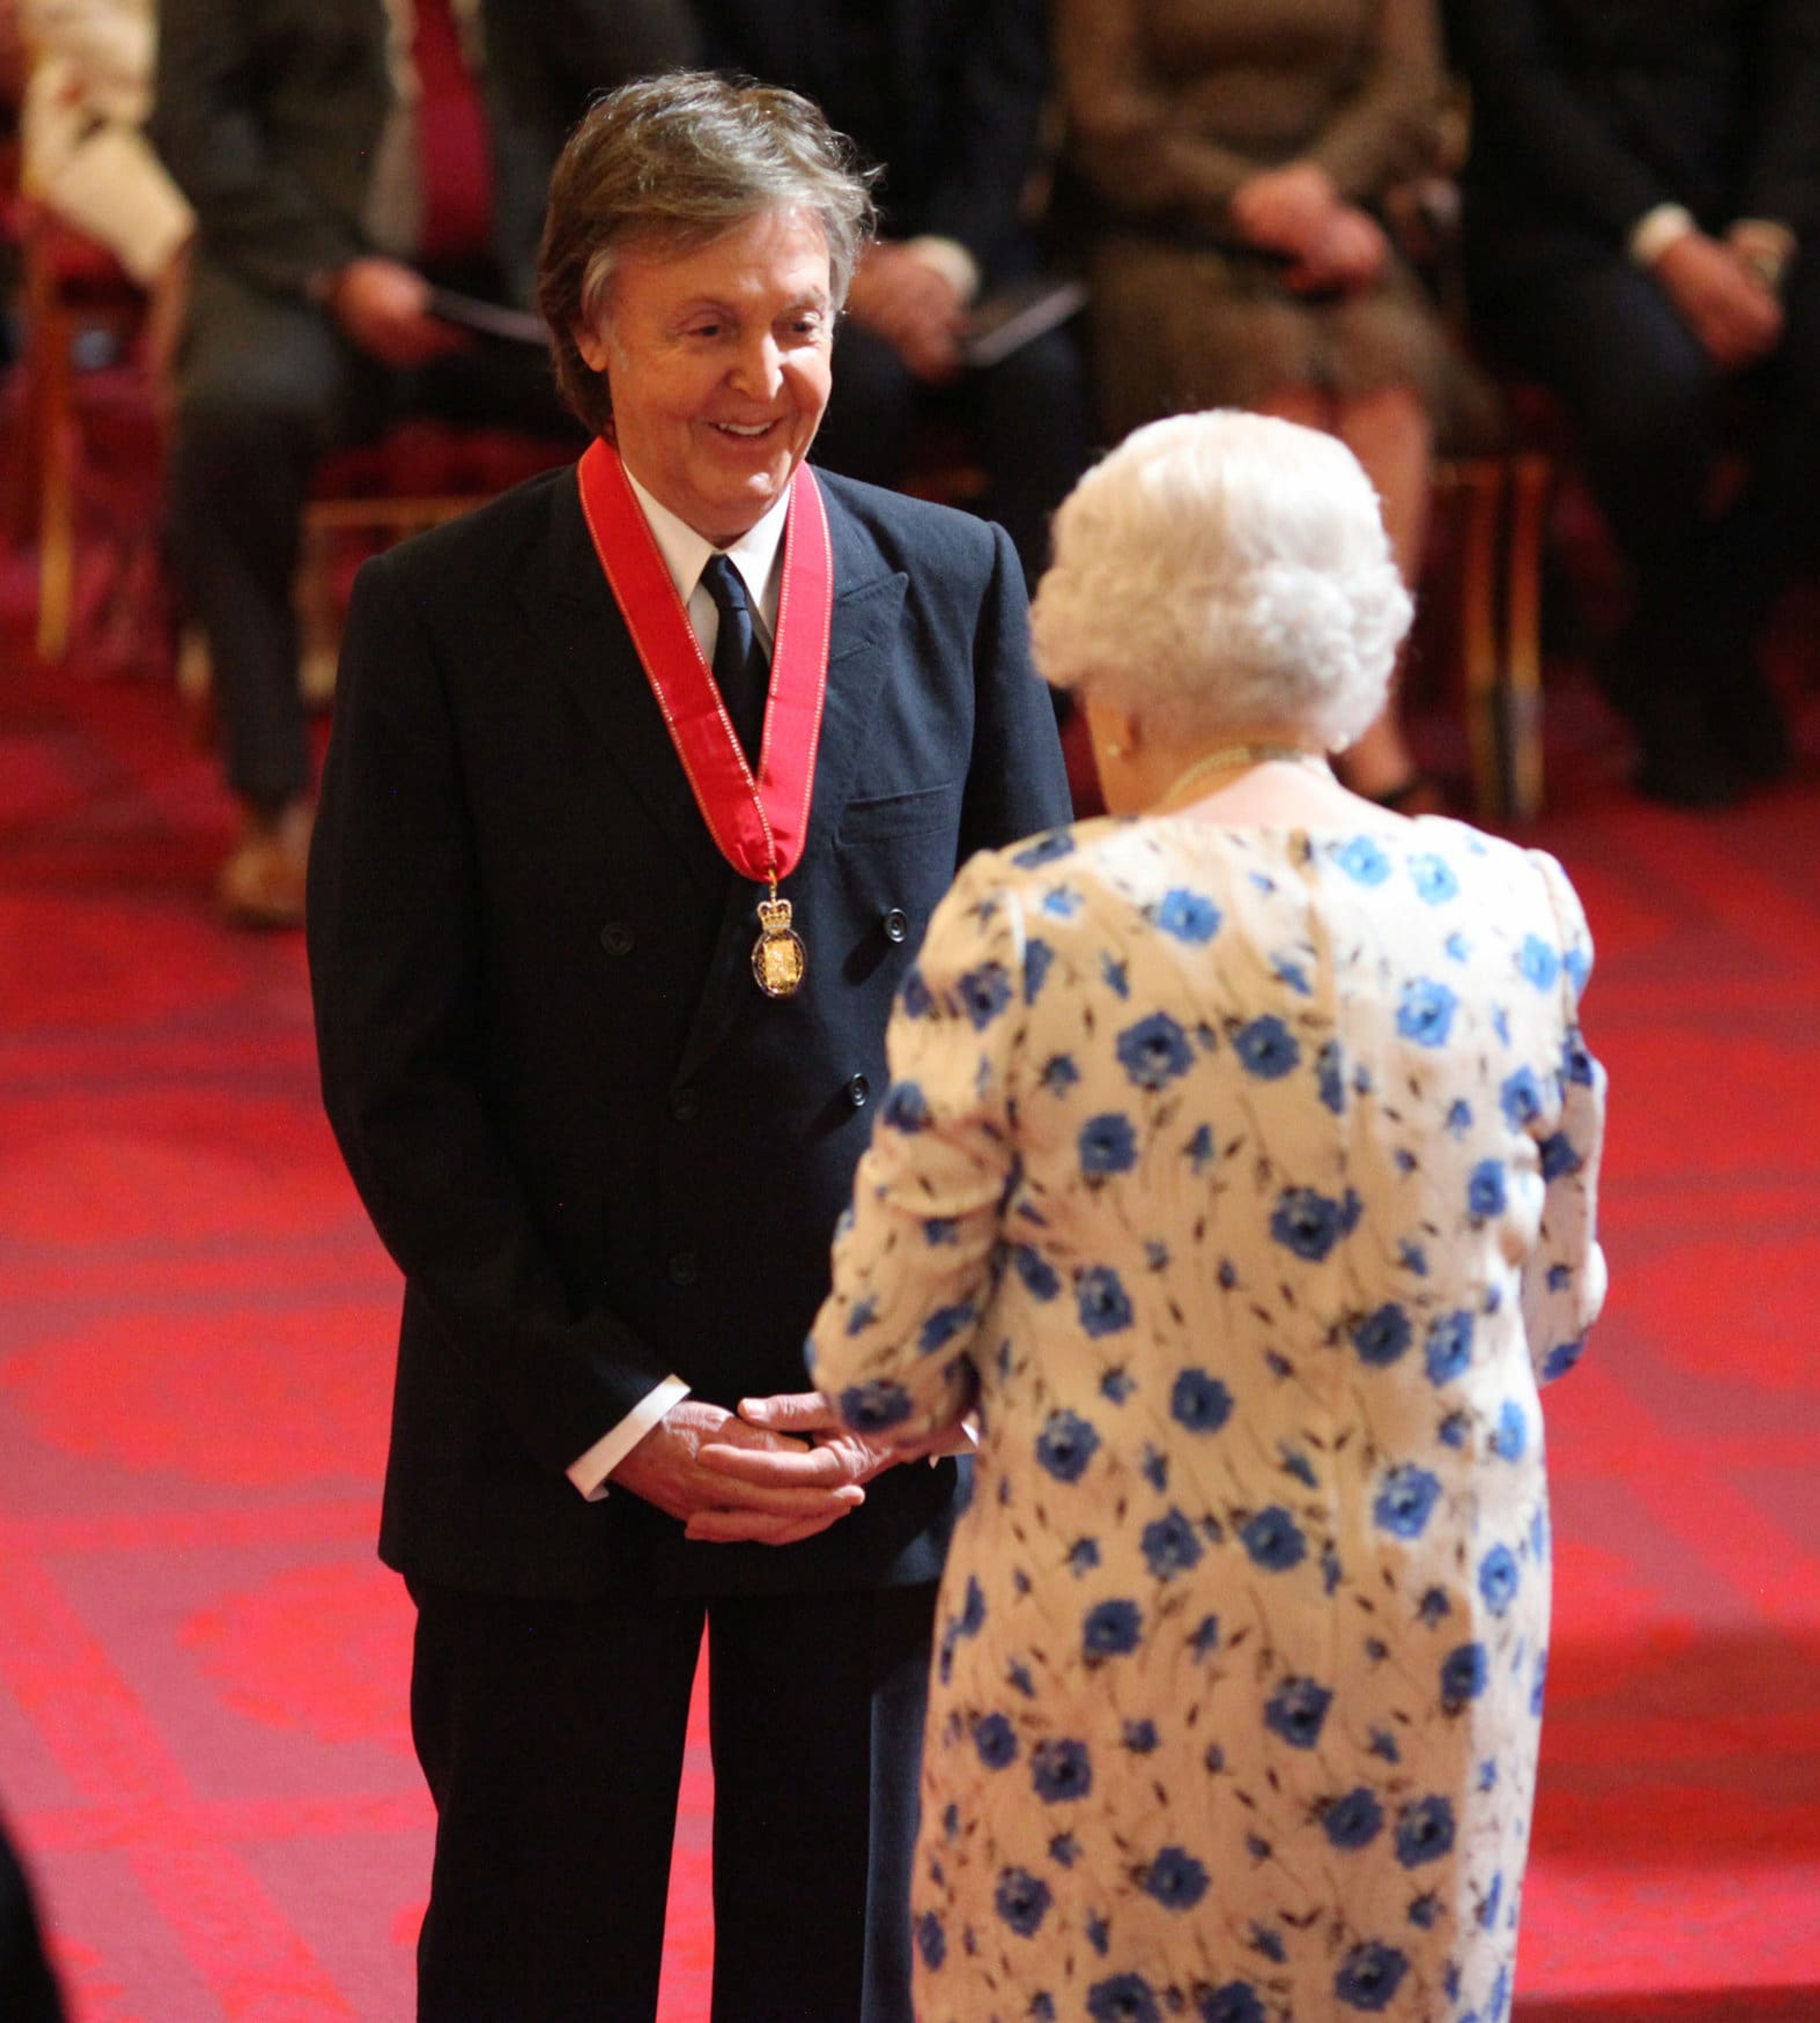 Photo of Paul at Buckingham Palace being made a Companion of Honour by Queen Elizabeth II.